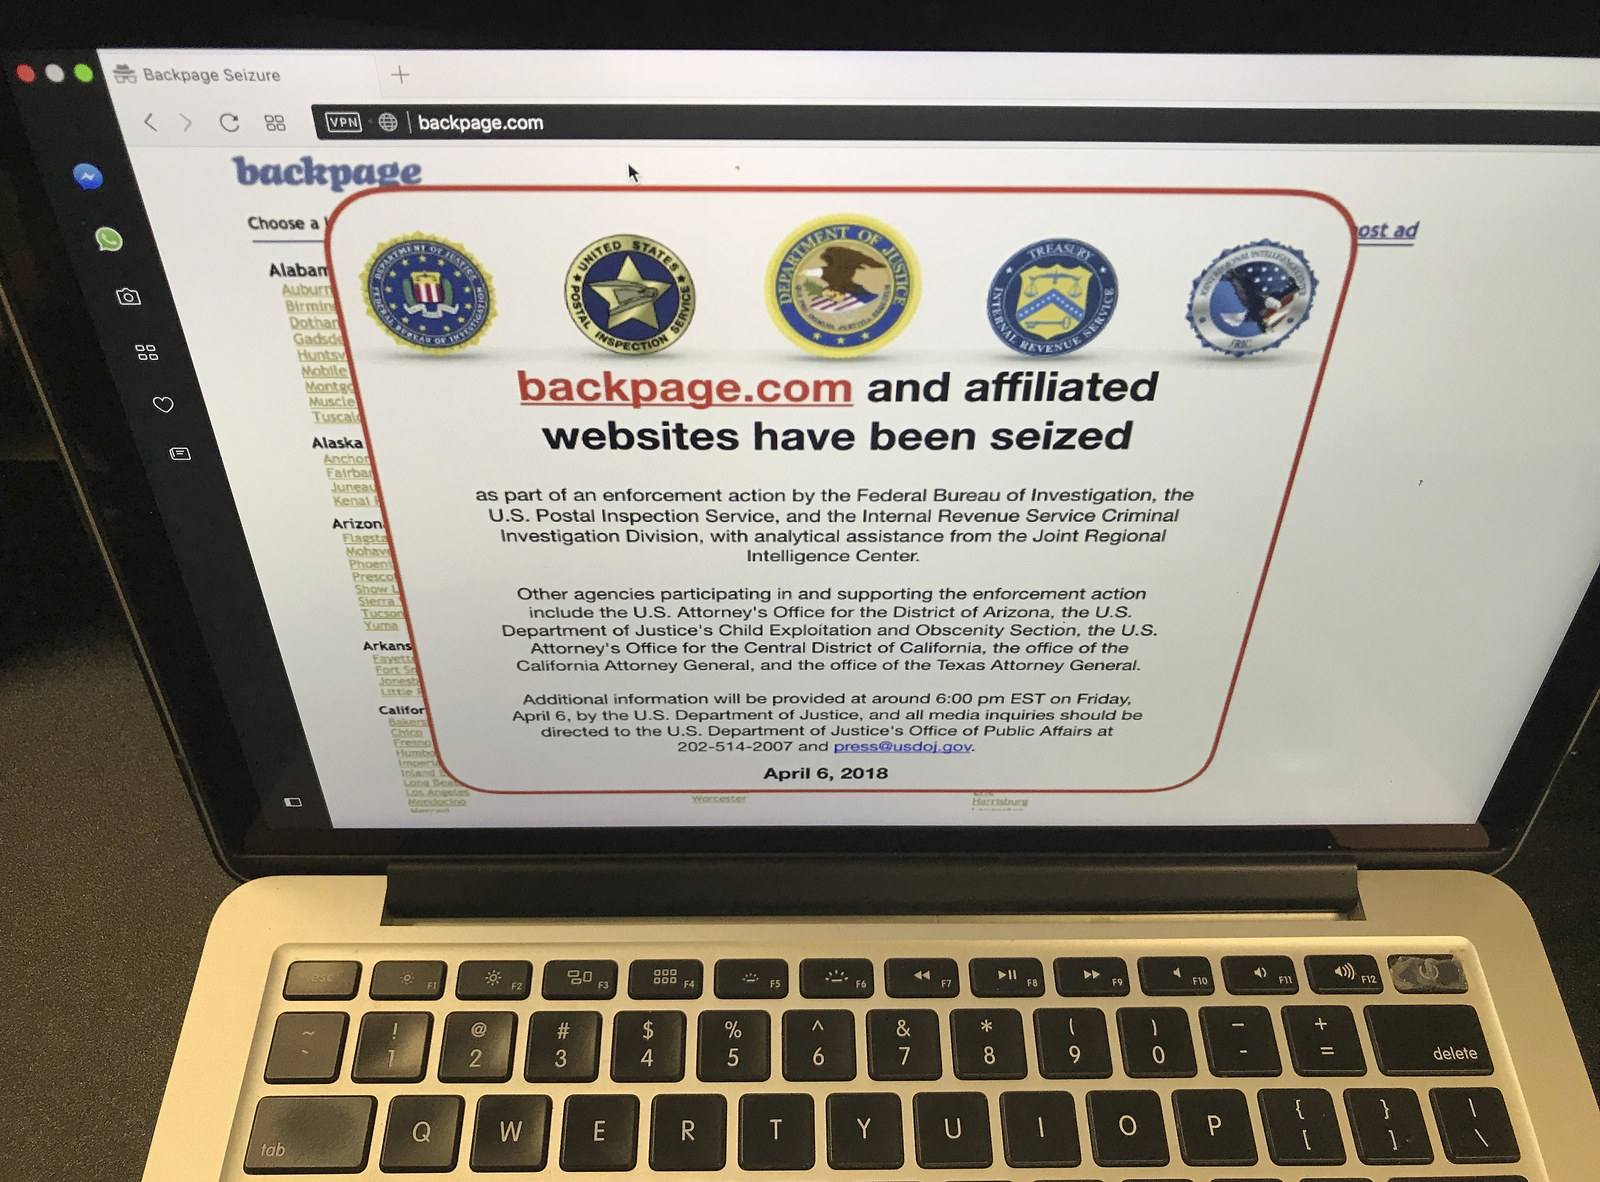 Backpage Founders Charged With Facilitating Prostitution And Laundering